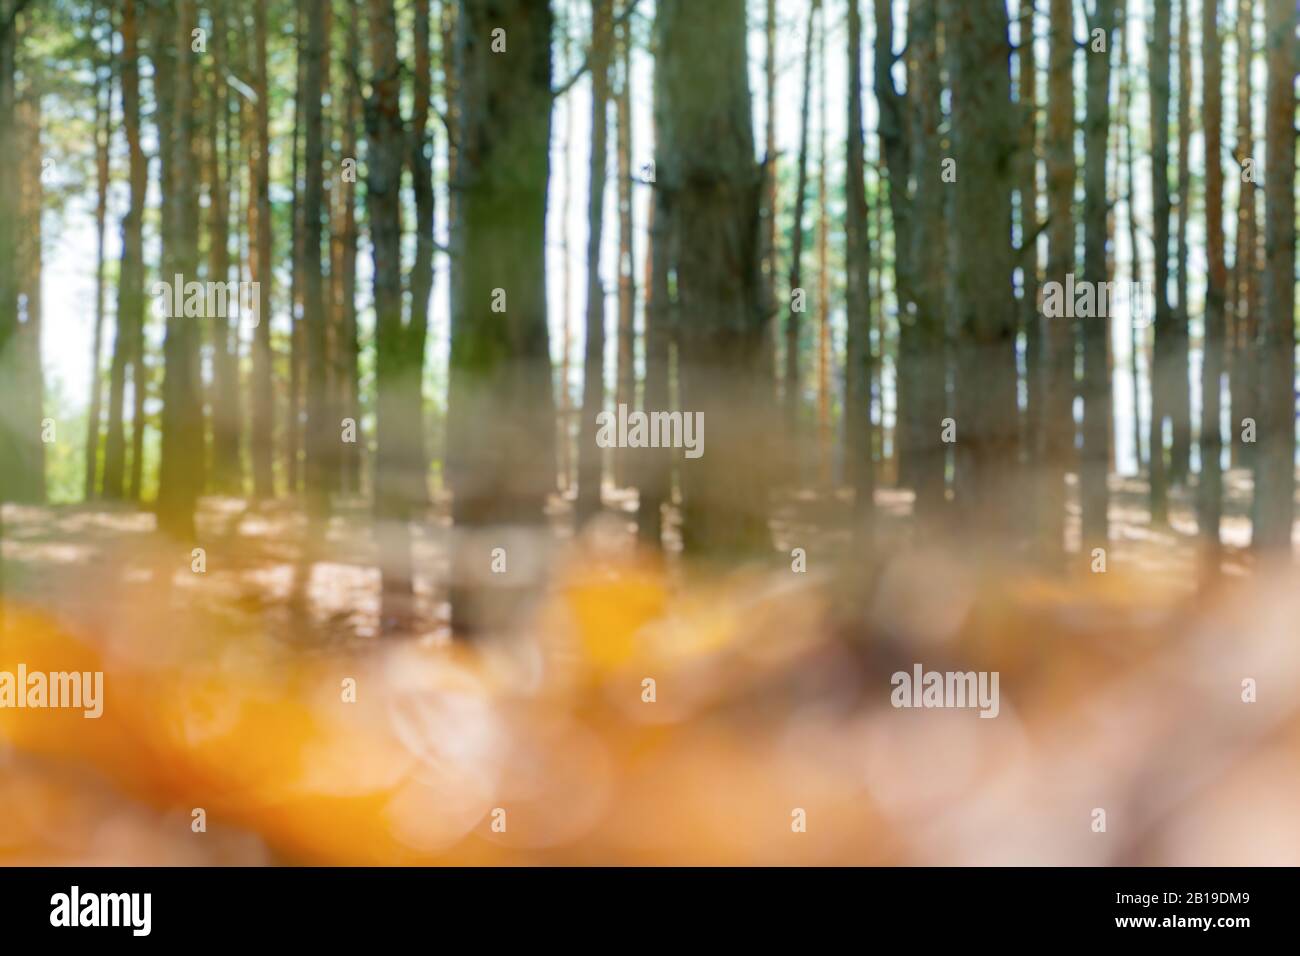 Blurred forest background, defocused tall pines, sunny day. Stock Photo